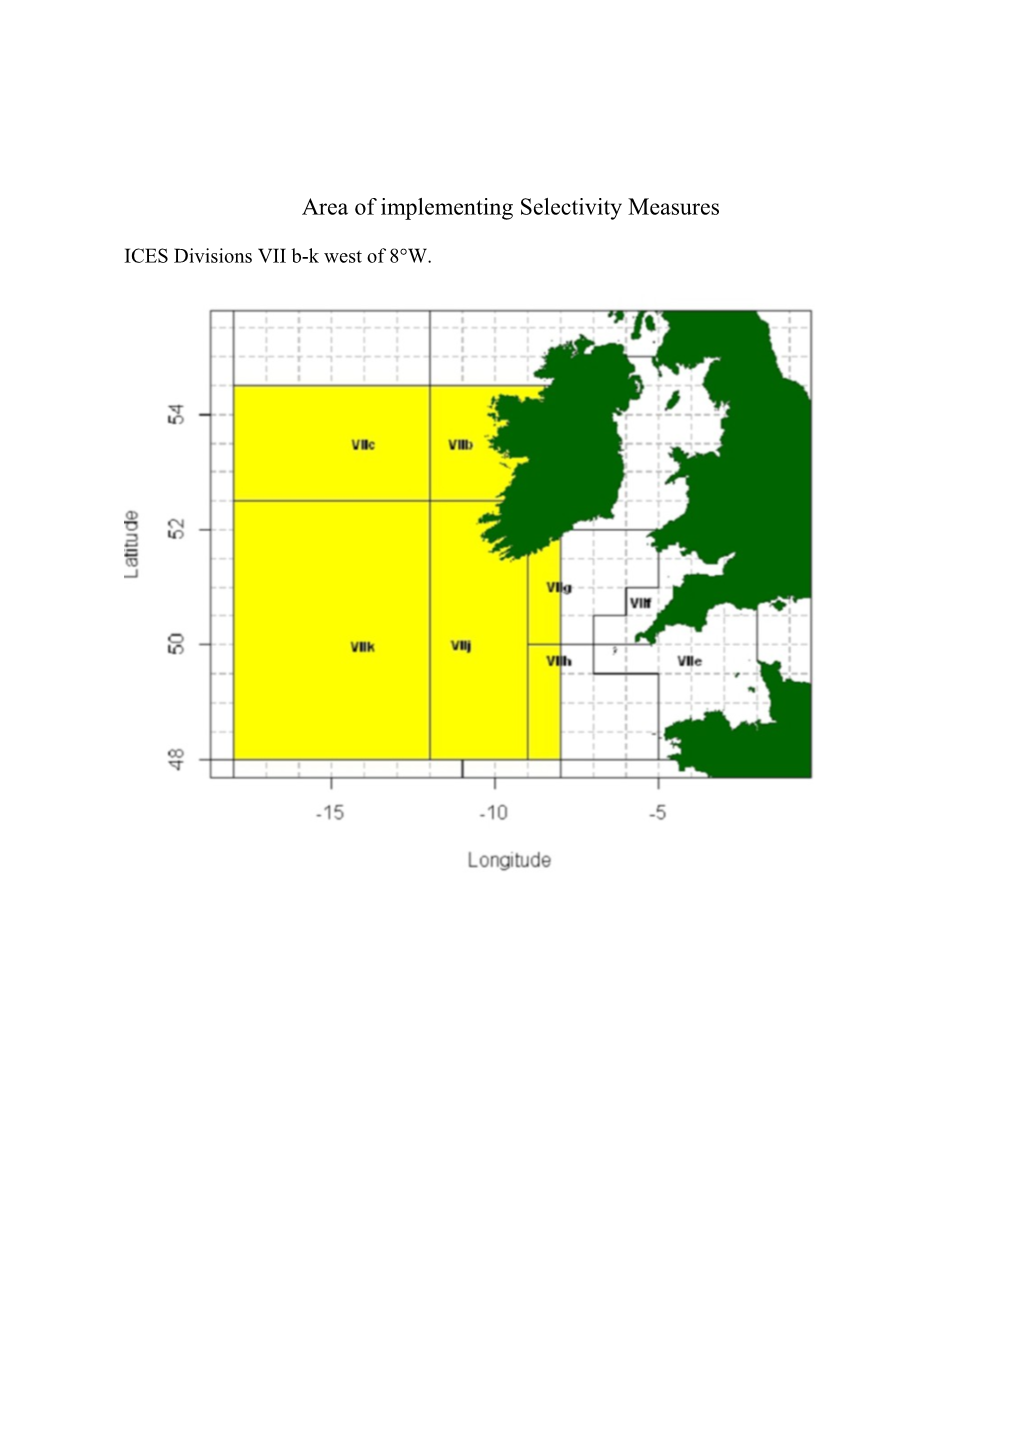 Voluntary Selectivity Scheme in the Celtic Sea, West of 80 W 2014